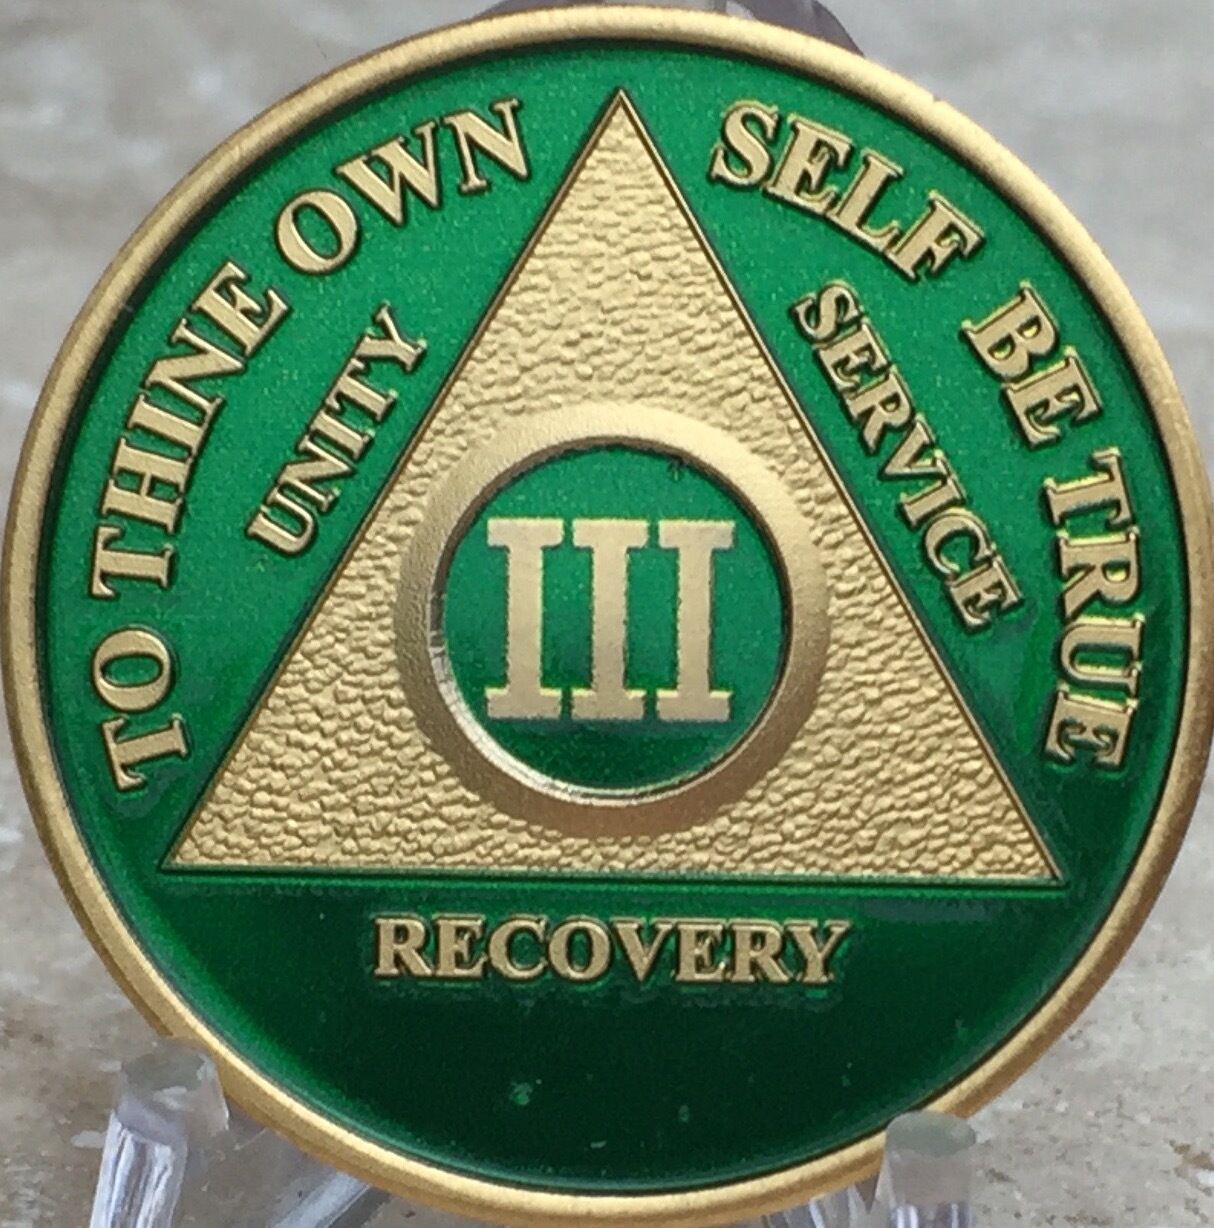 3 Year AA Medallion Green Gold Plated Alcoholics Anonymous Sobriety Chip Coin